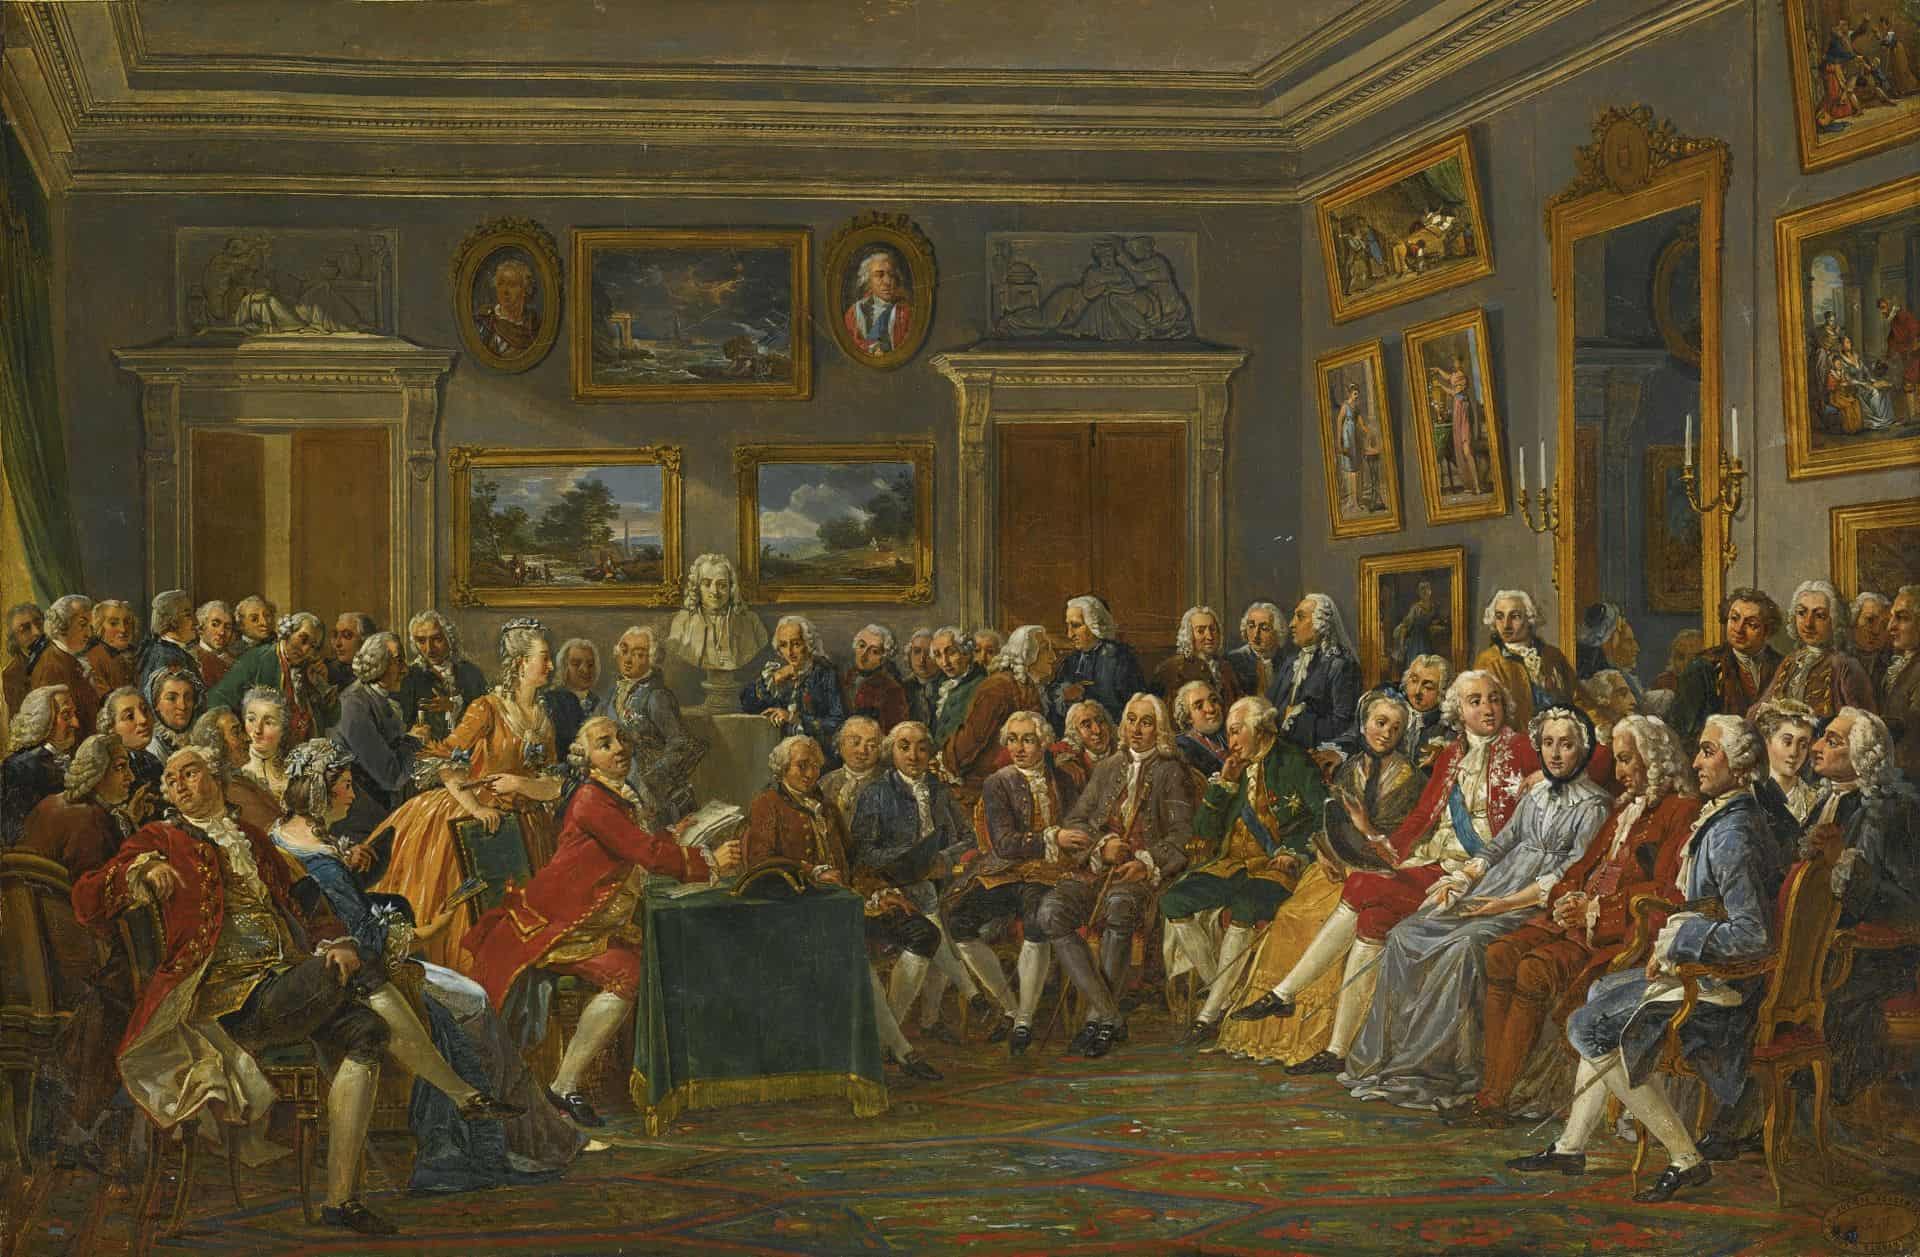 A painting shows people gathered around one reading Voltaire.